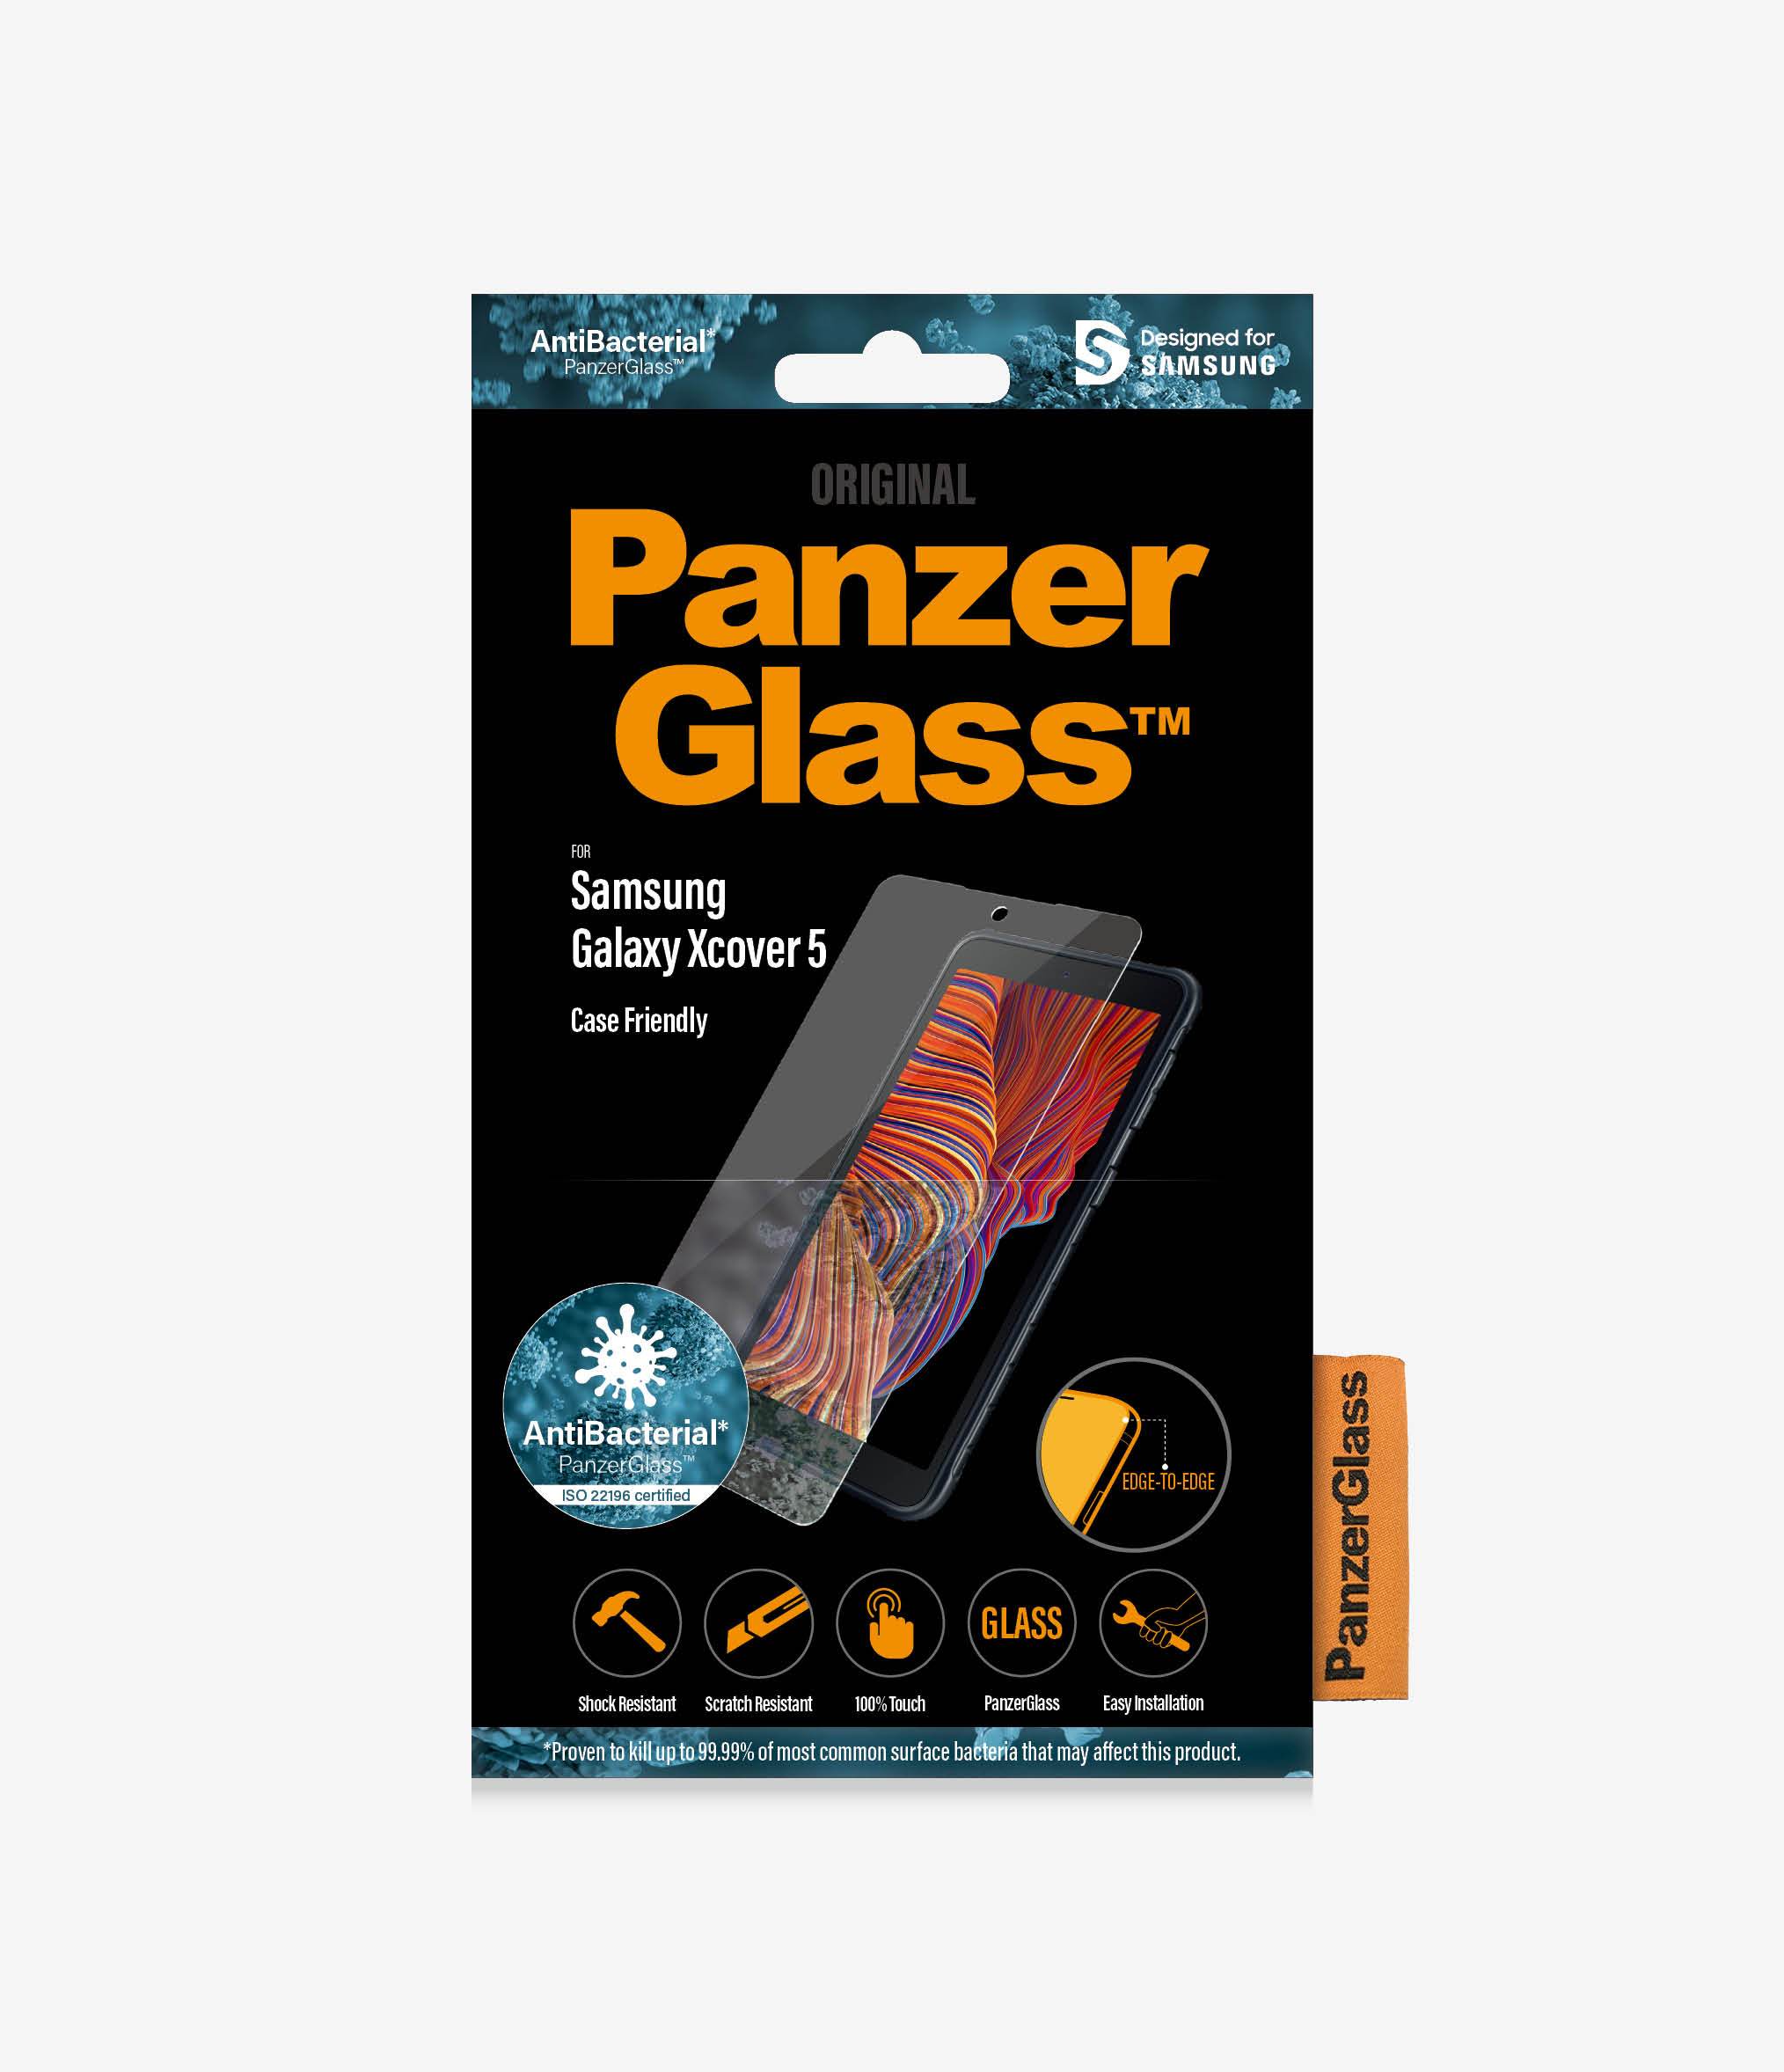 PanzerGlass™ Samsung Galaxy Xcover 5  Antibacterial - (7267) - Screen Protector - Antibacterial glass, Protects the entire screen, Crystal clear